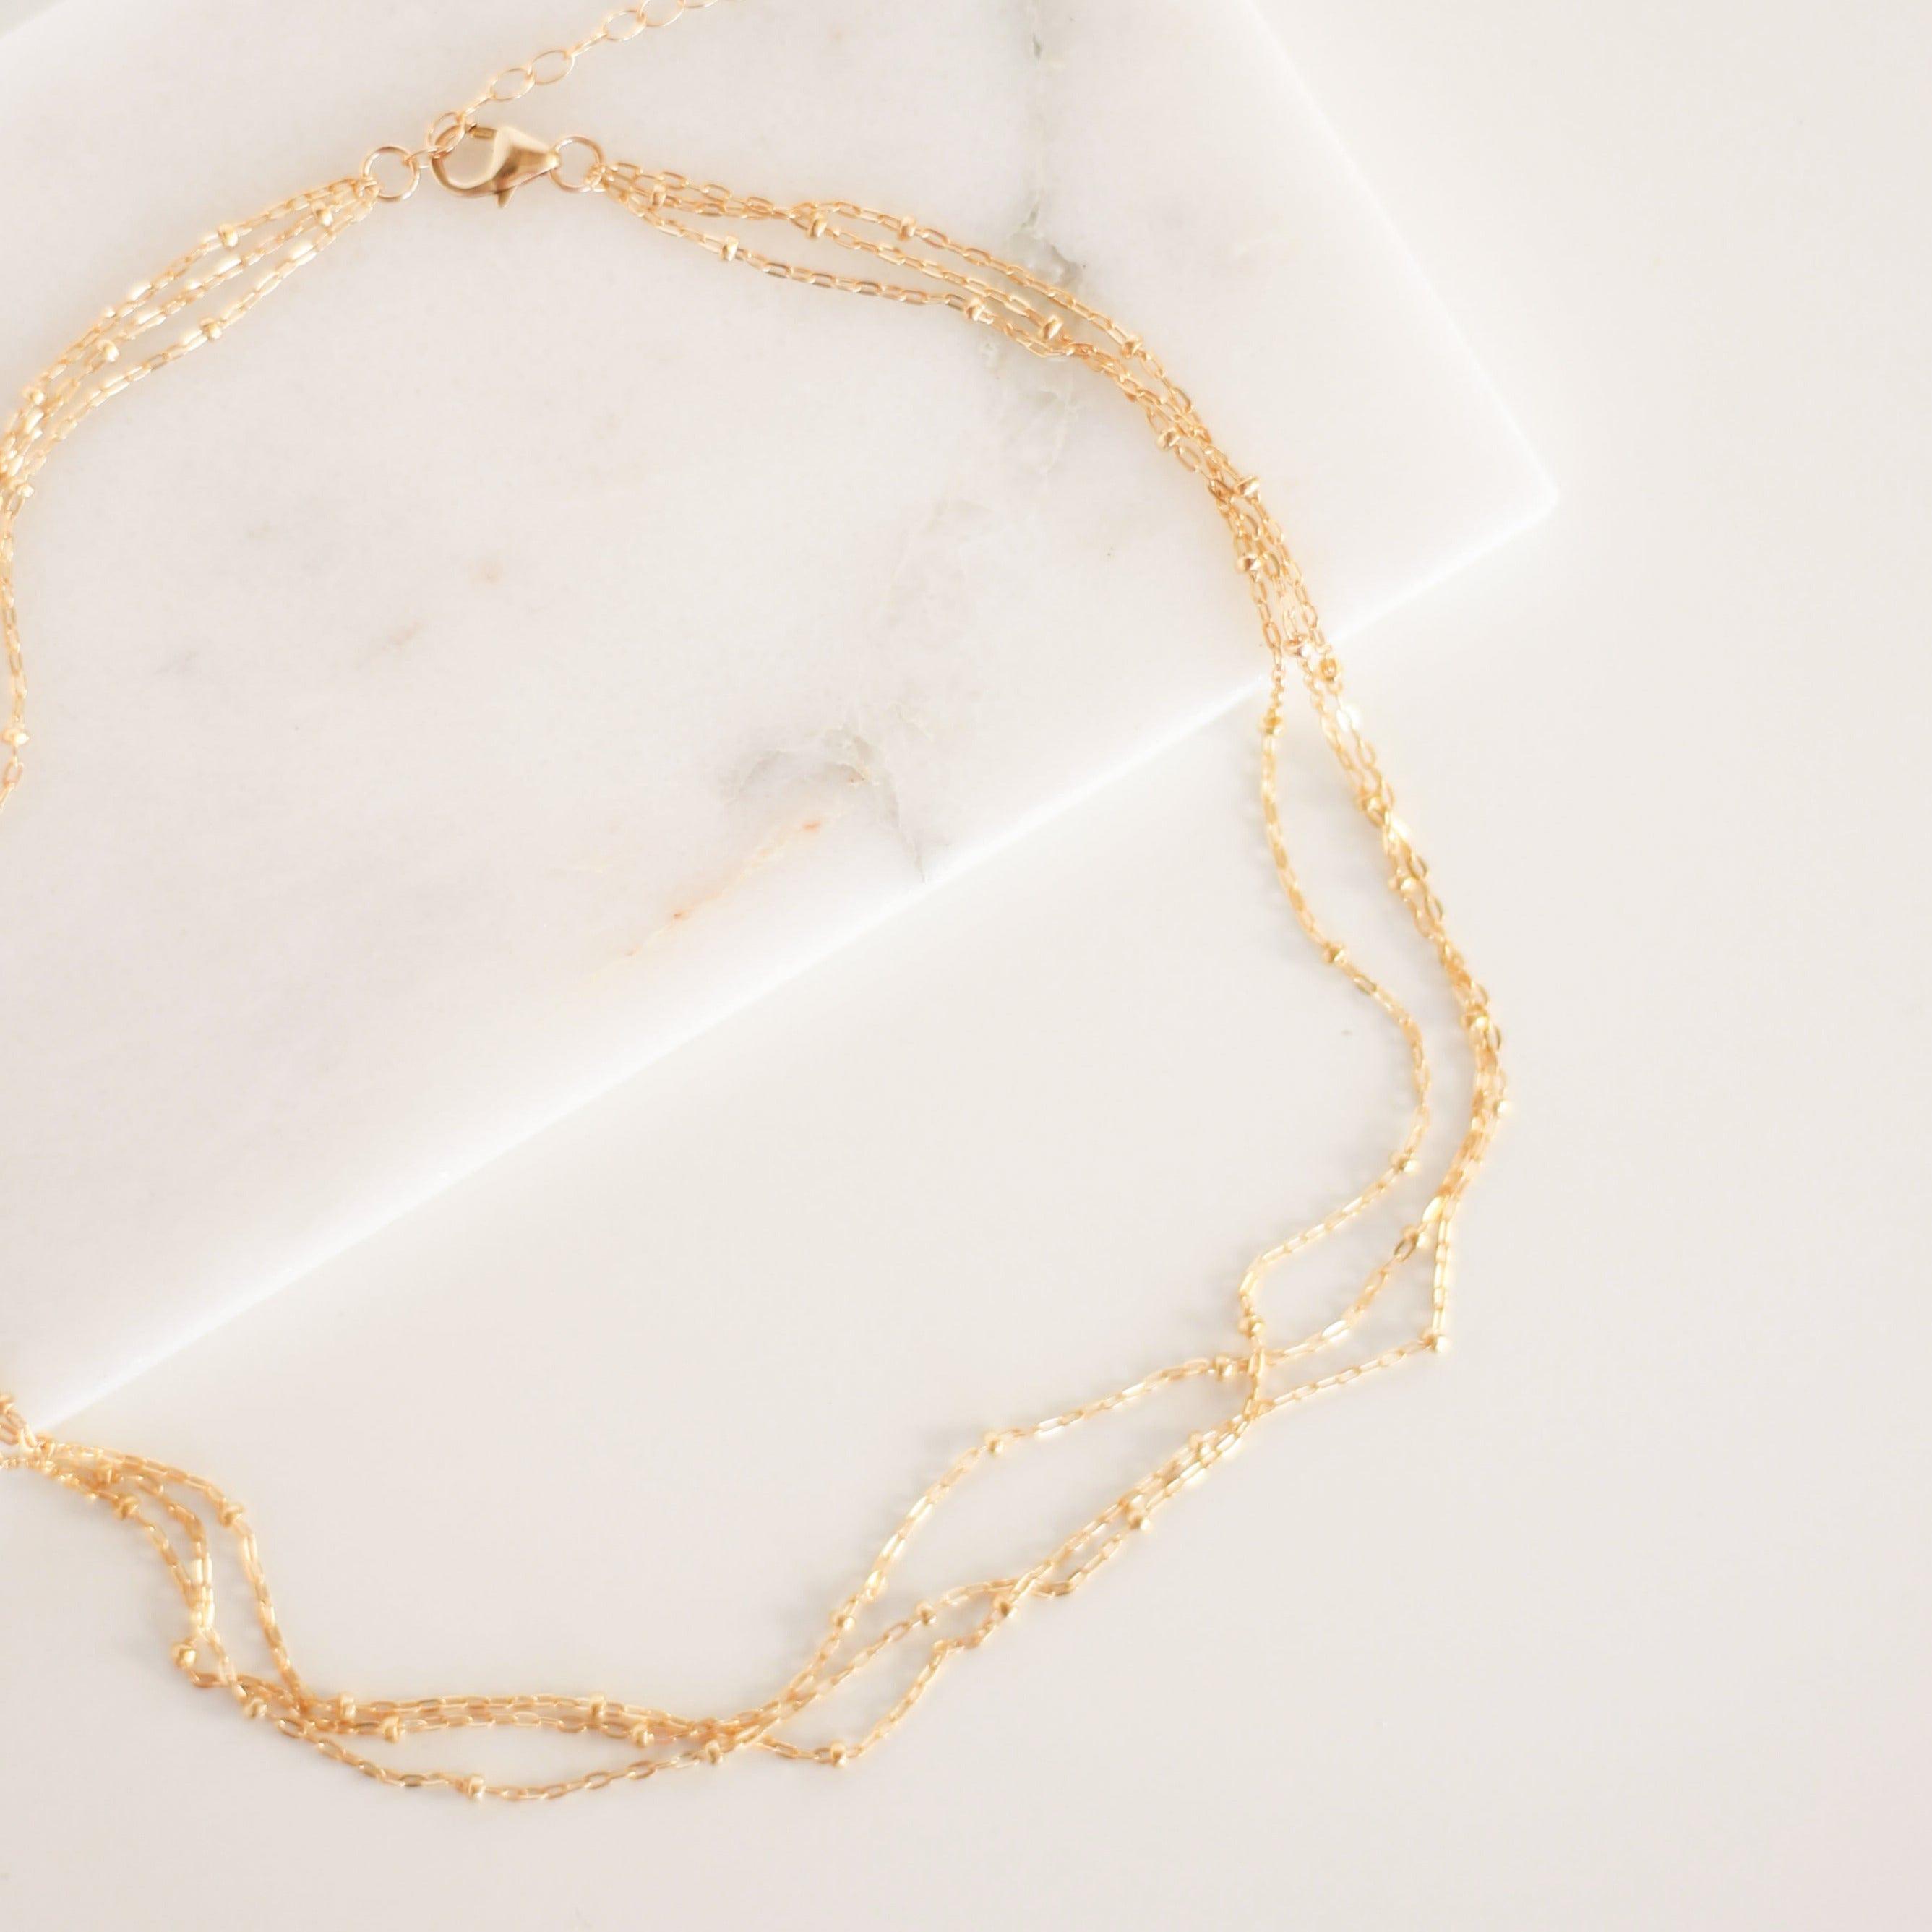 Triple Wrap Satellite Chain Necklace - Nolia Jewelry - Meaningful + Sustainably Handcrafted Jewelry